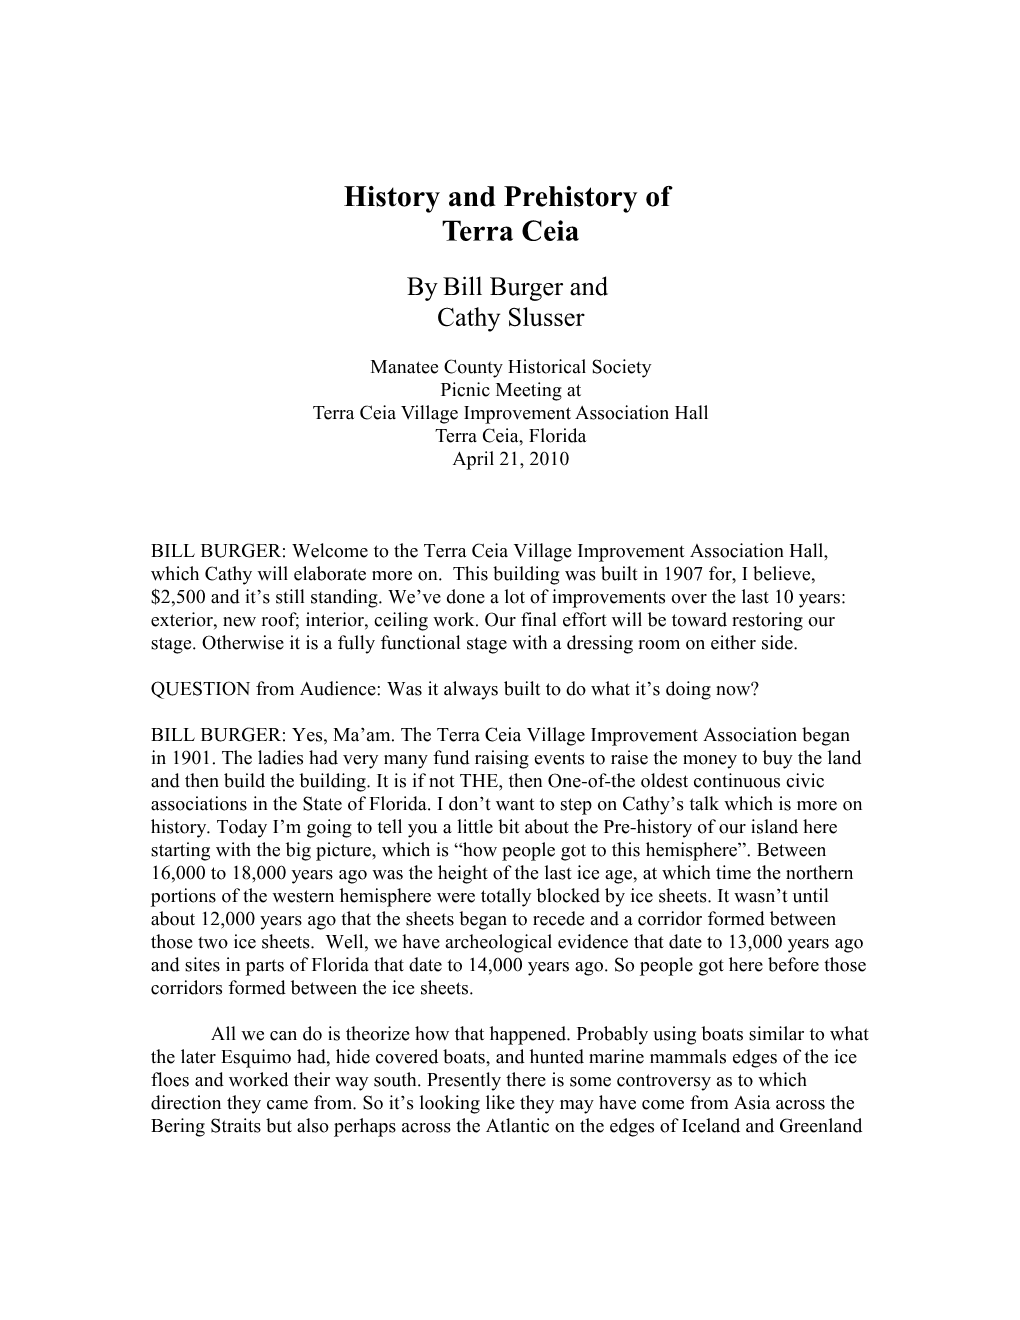 History and Prehistory Of